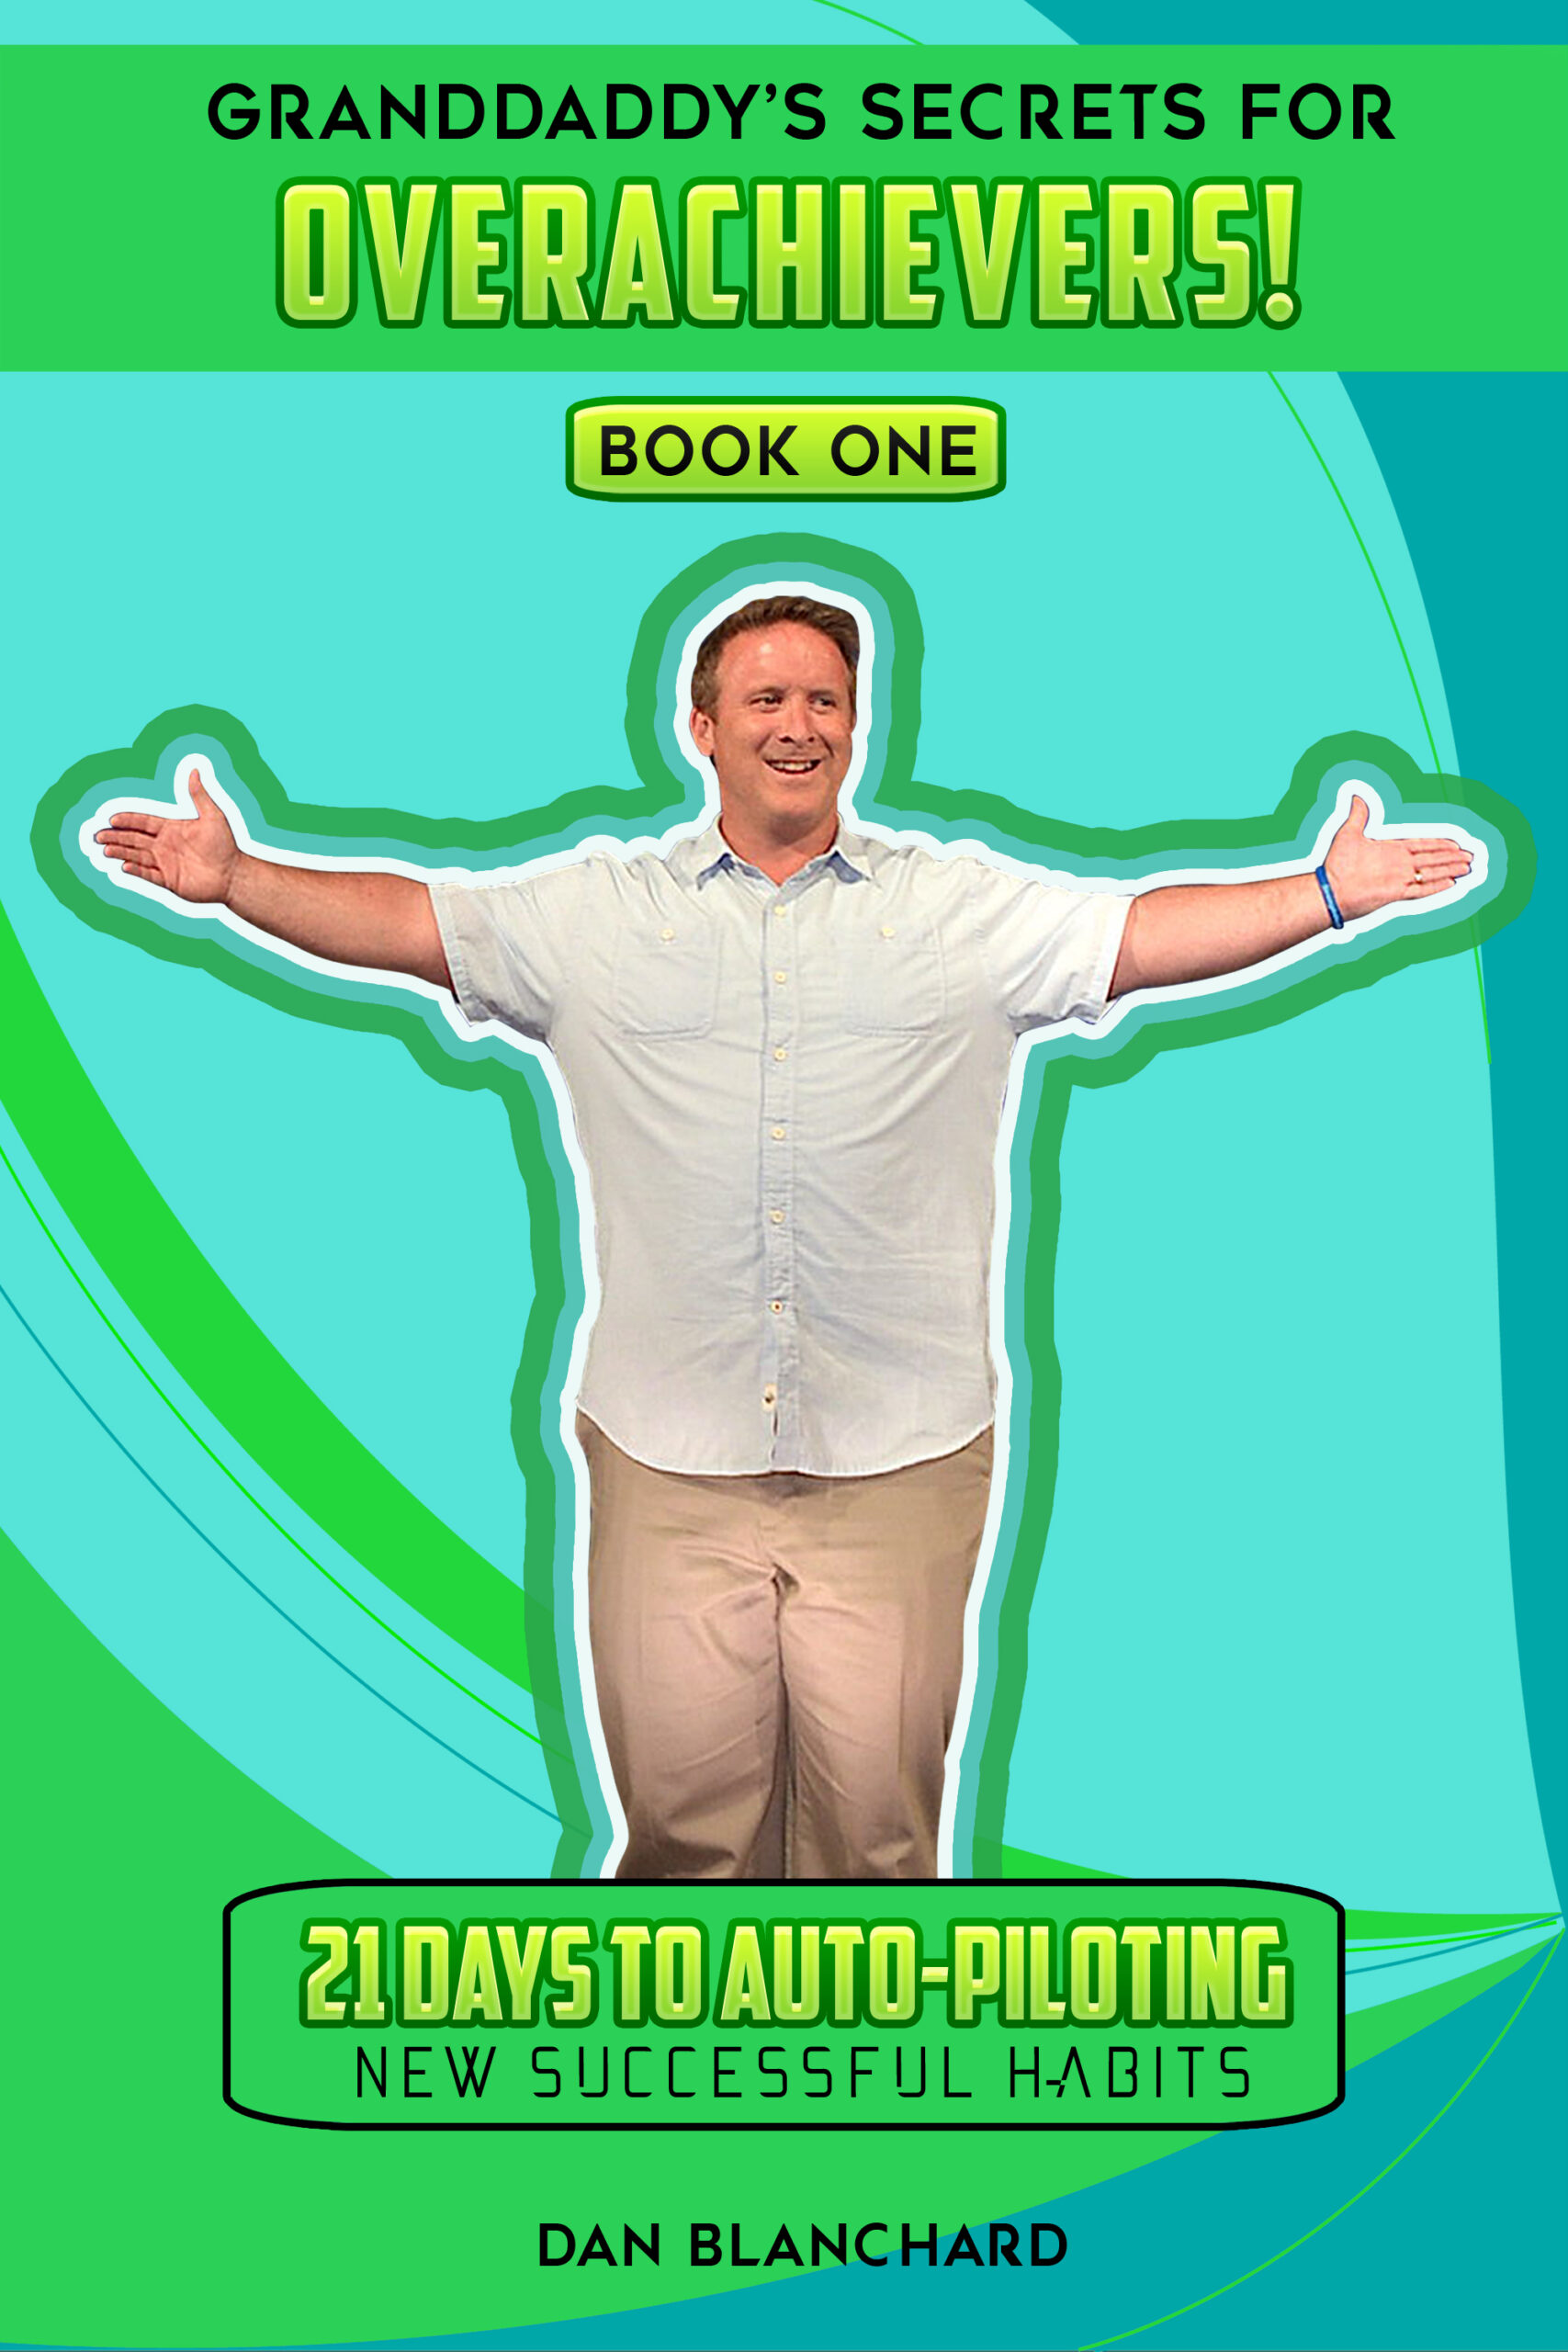 FREE: GRANDDADDY’S SECRETS FOR OVERACHEIVERS! BOOK ONE: 21 Days to Auto-Piloting New Successful Habits by Dan Blanchard